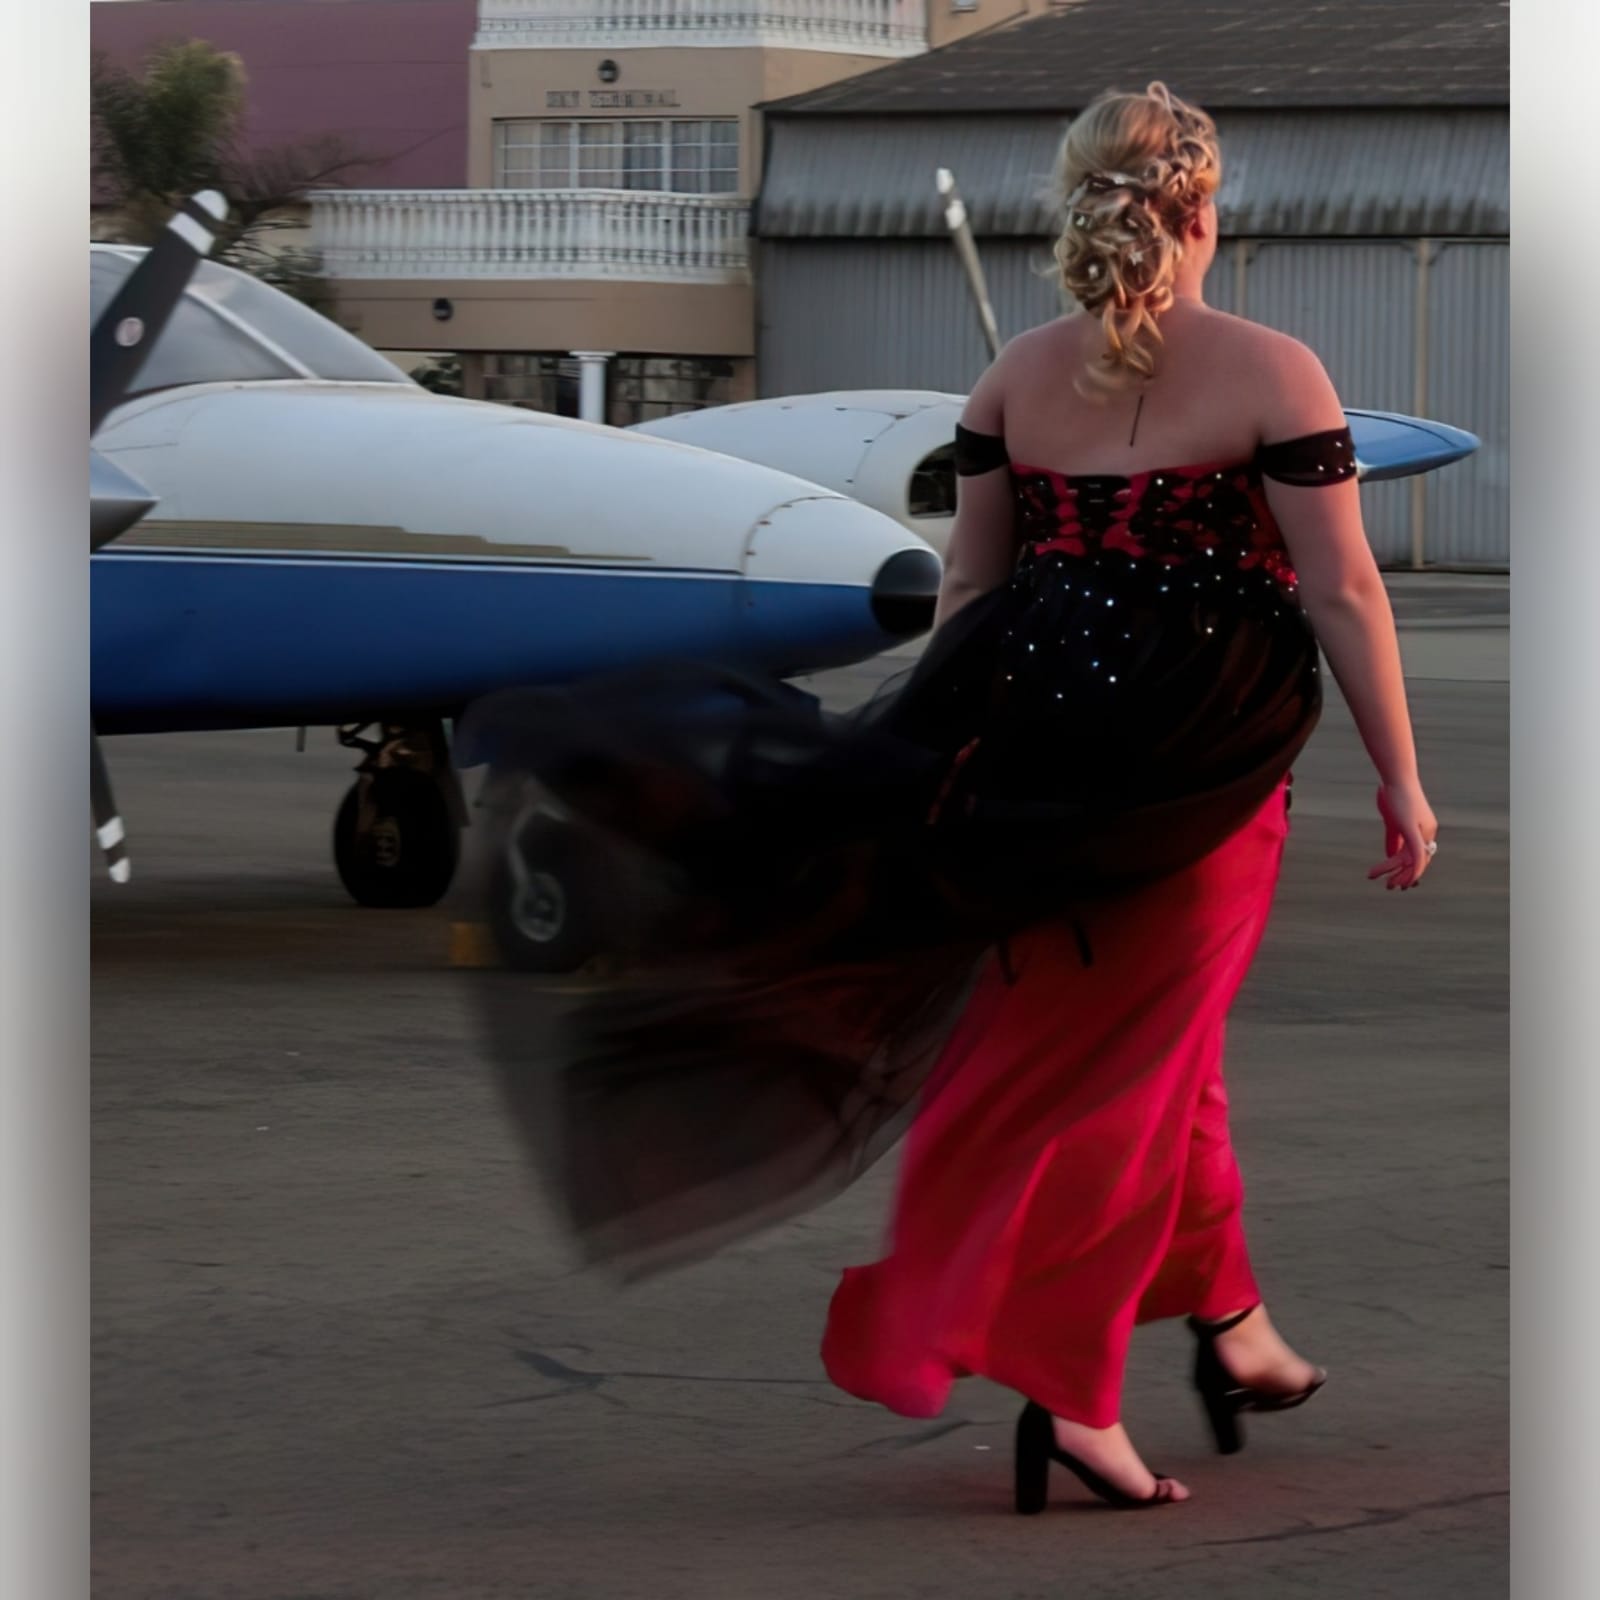 Red and black plus size matric dress 4 red and black plus size matric dress. Off-shoulder fitted dress with a flare from knee down, detailed with black lace and silver beads. Tulle black skirt attached to the waist to create a dramatic effect.